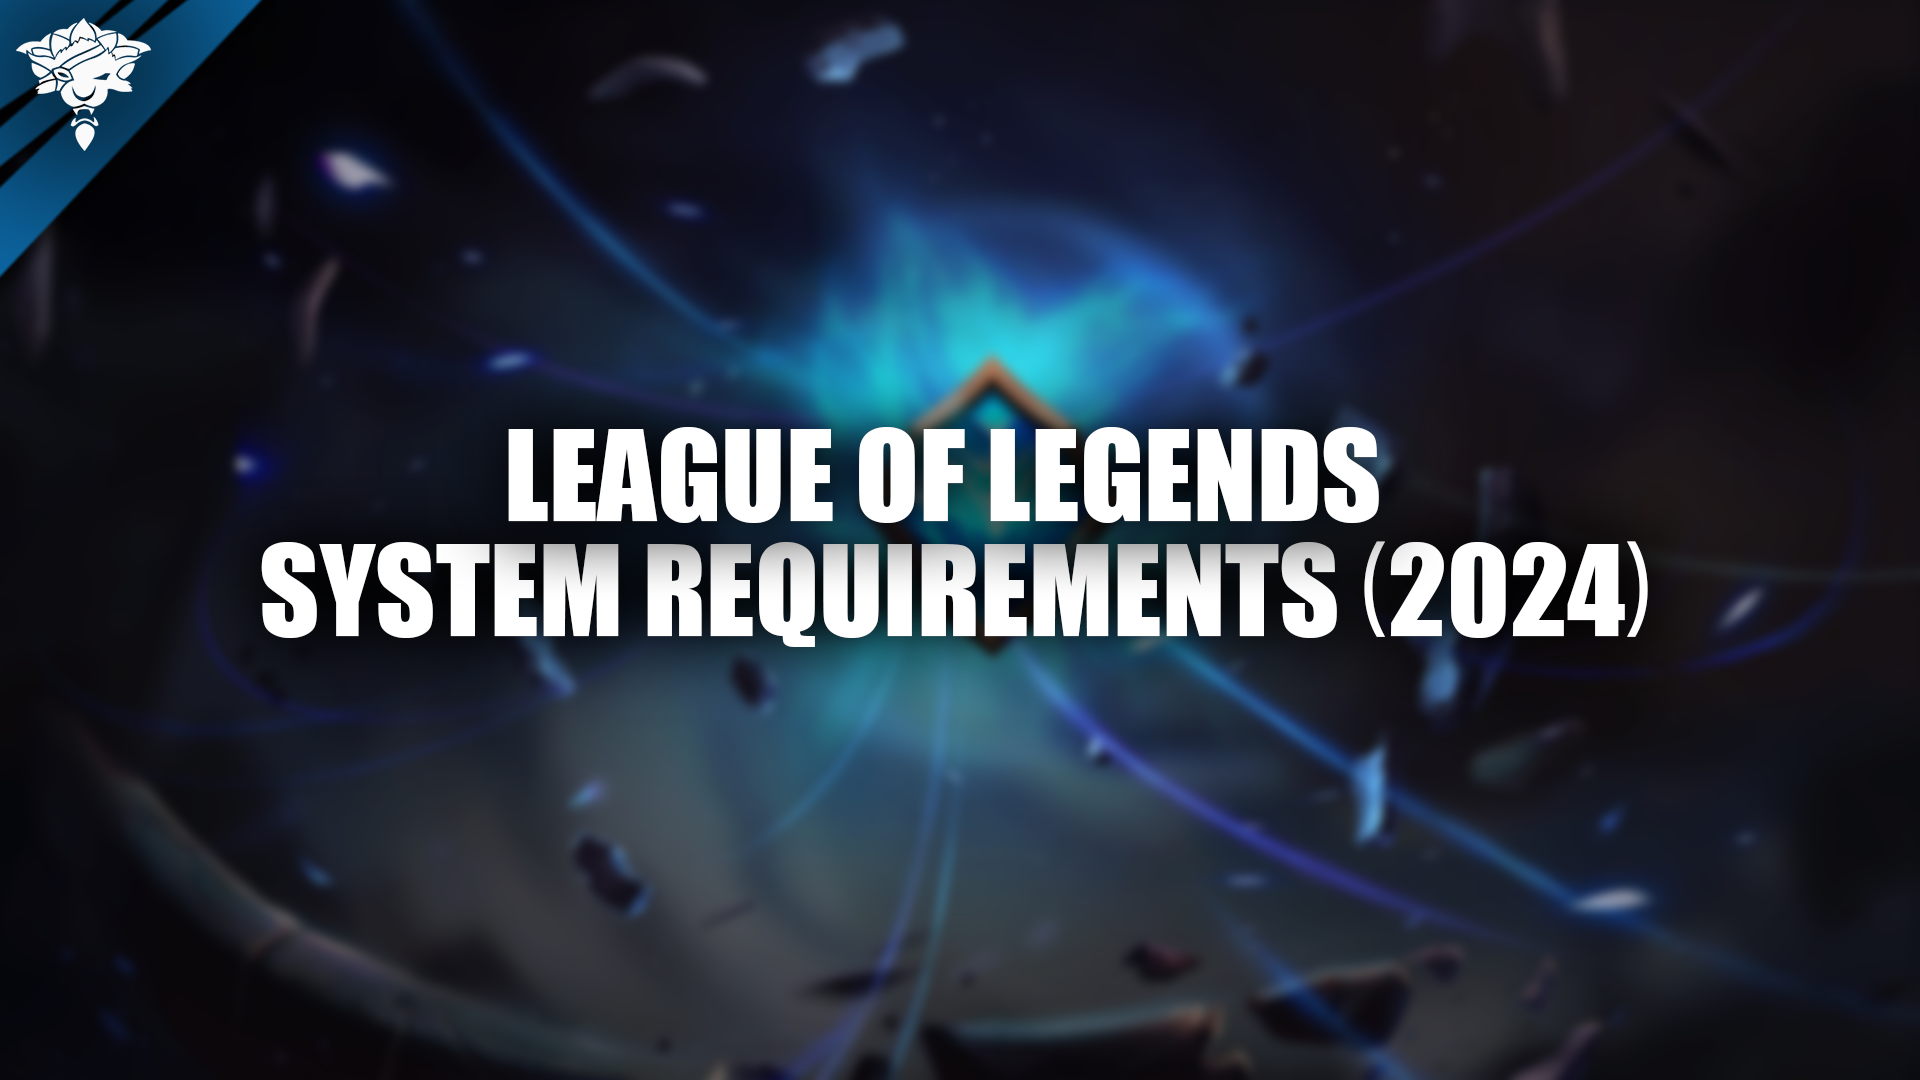 League of Legends System Requirements (2024)